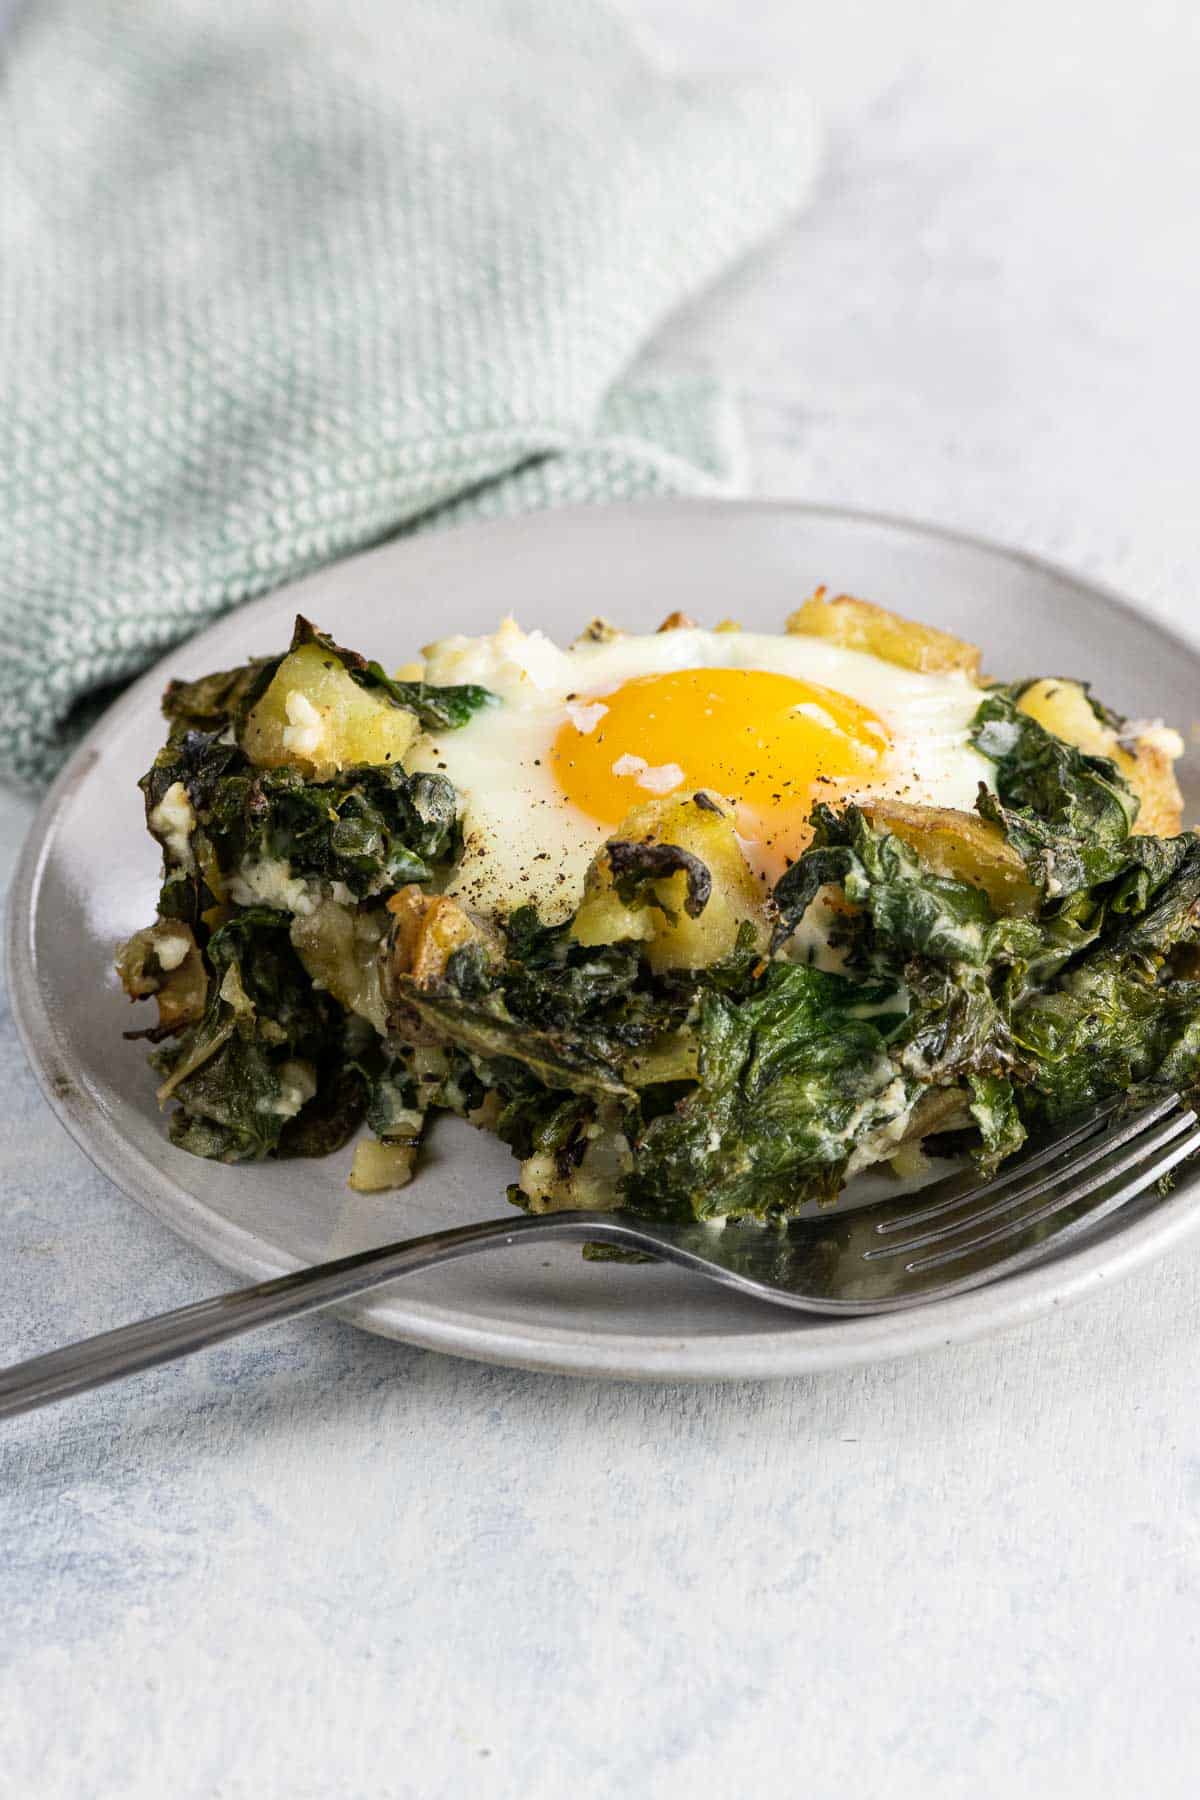 a baked egg with kale and potatoes on a plate with a fork and napkin